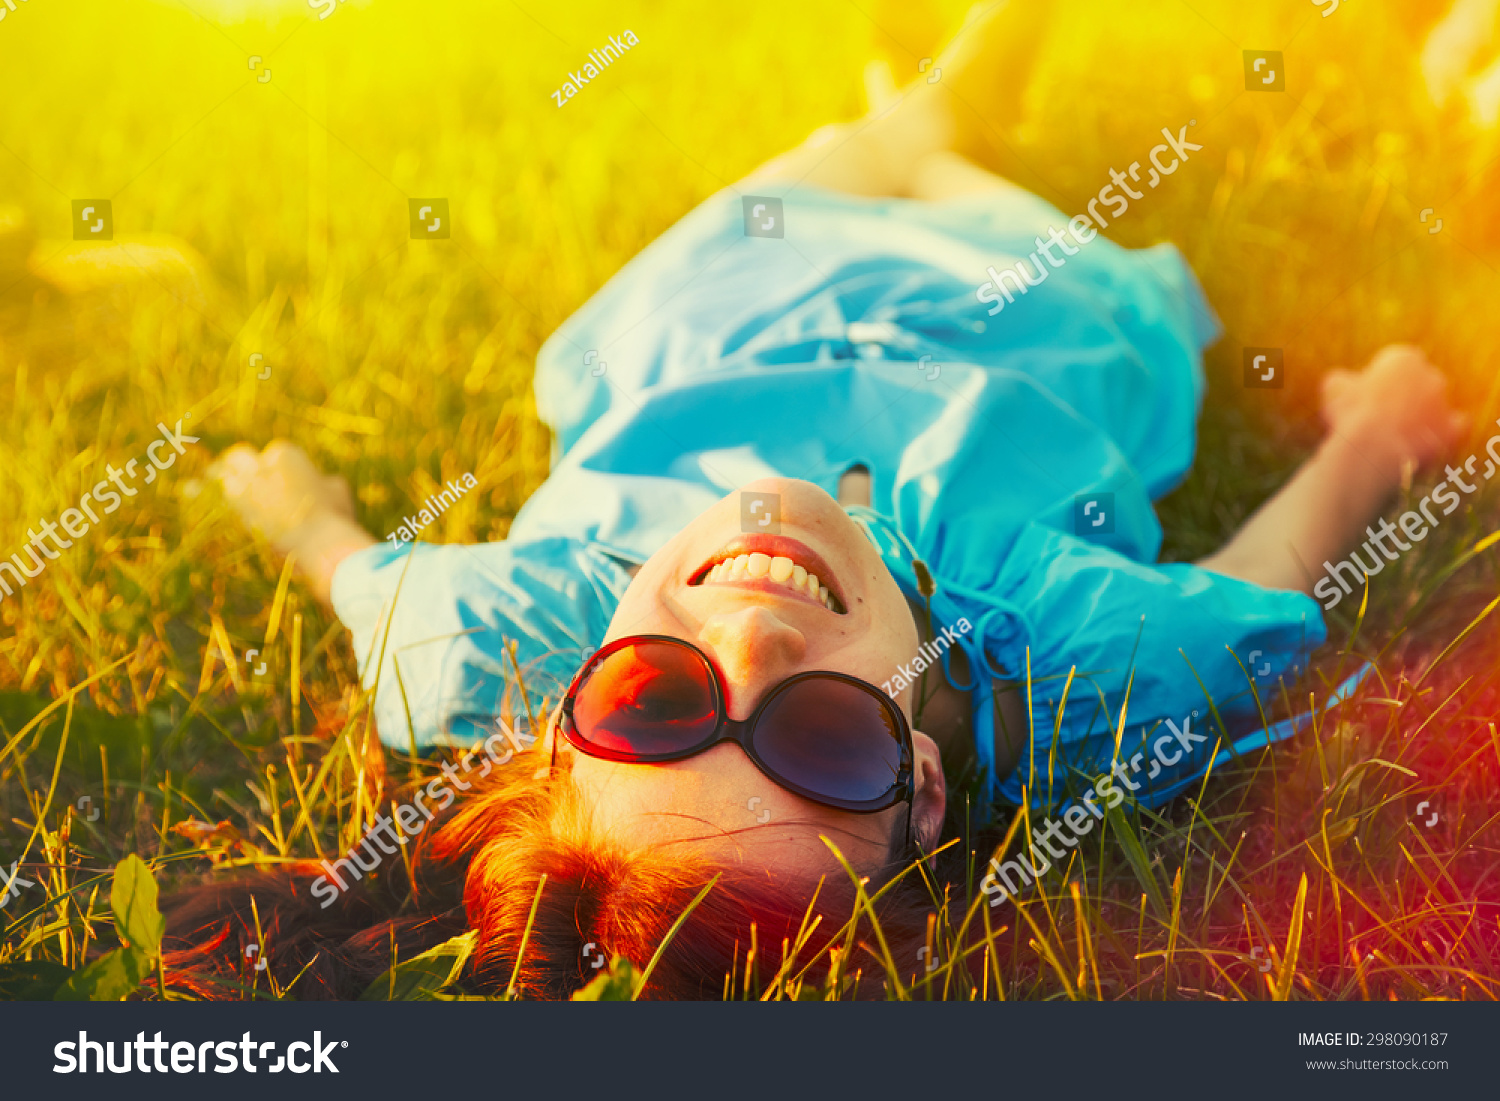 happy and smiling woman relaxing outdoors  #298090187